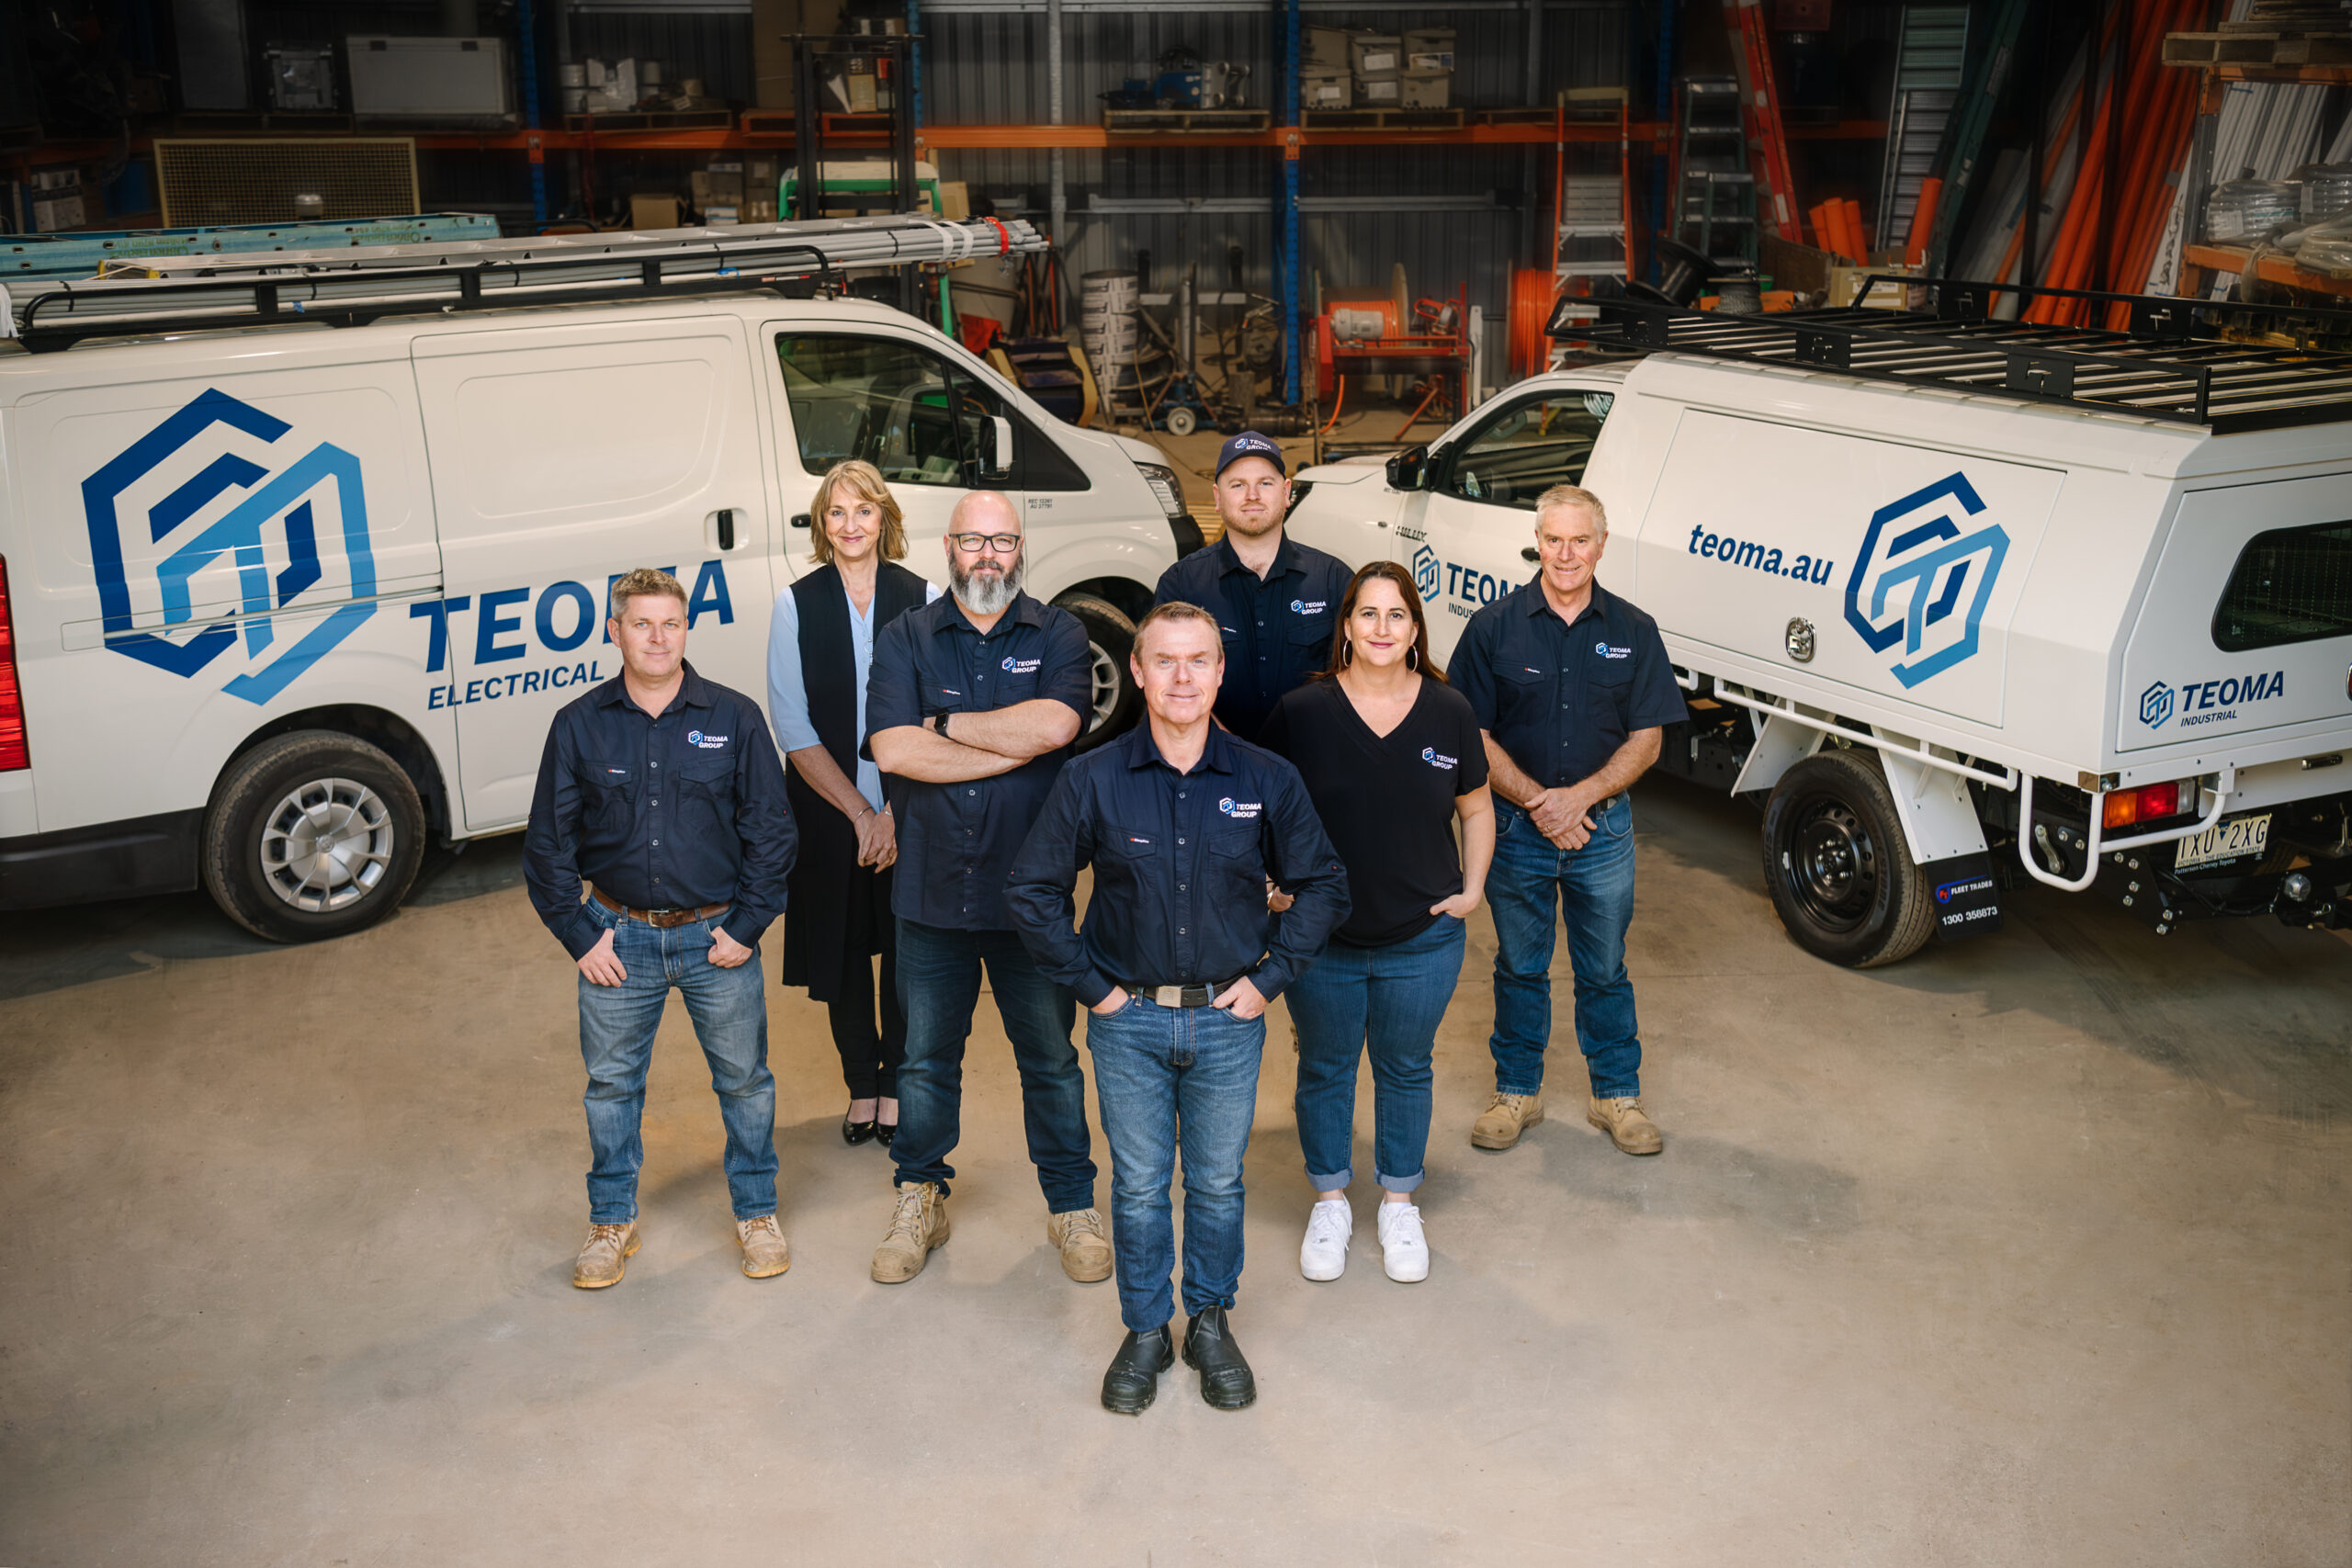 Electrical Contracting Company in Melbourne - Teoma Group